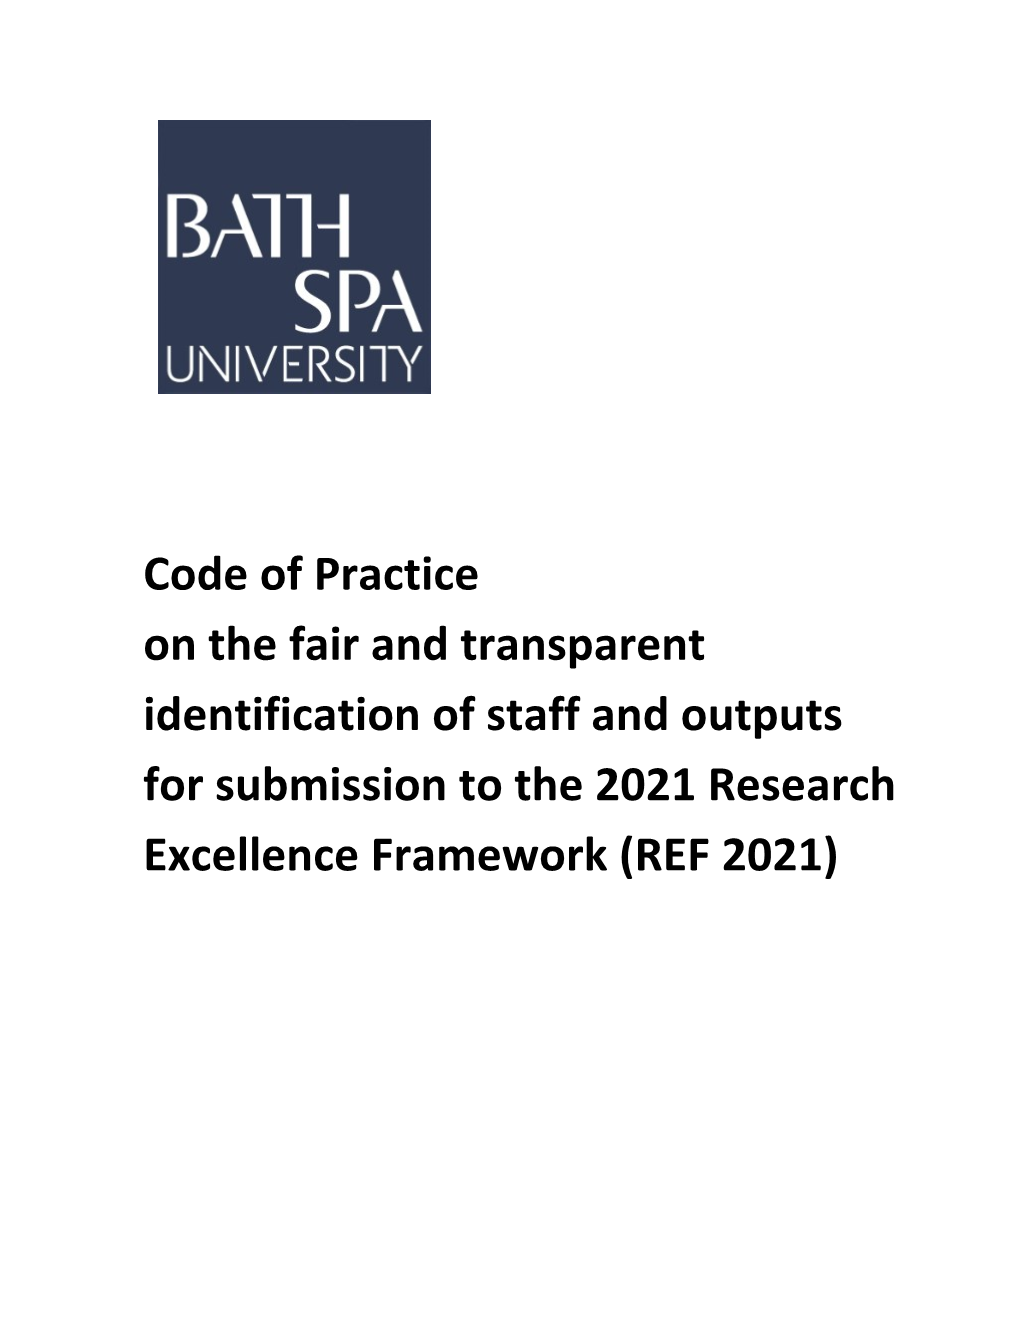 Code of Practice on the Fair and Transparent Identification of Staff and Outputs for Submission to the 2021 Research Excellence Framework (REF 2021)